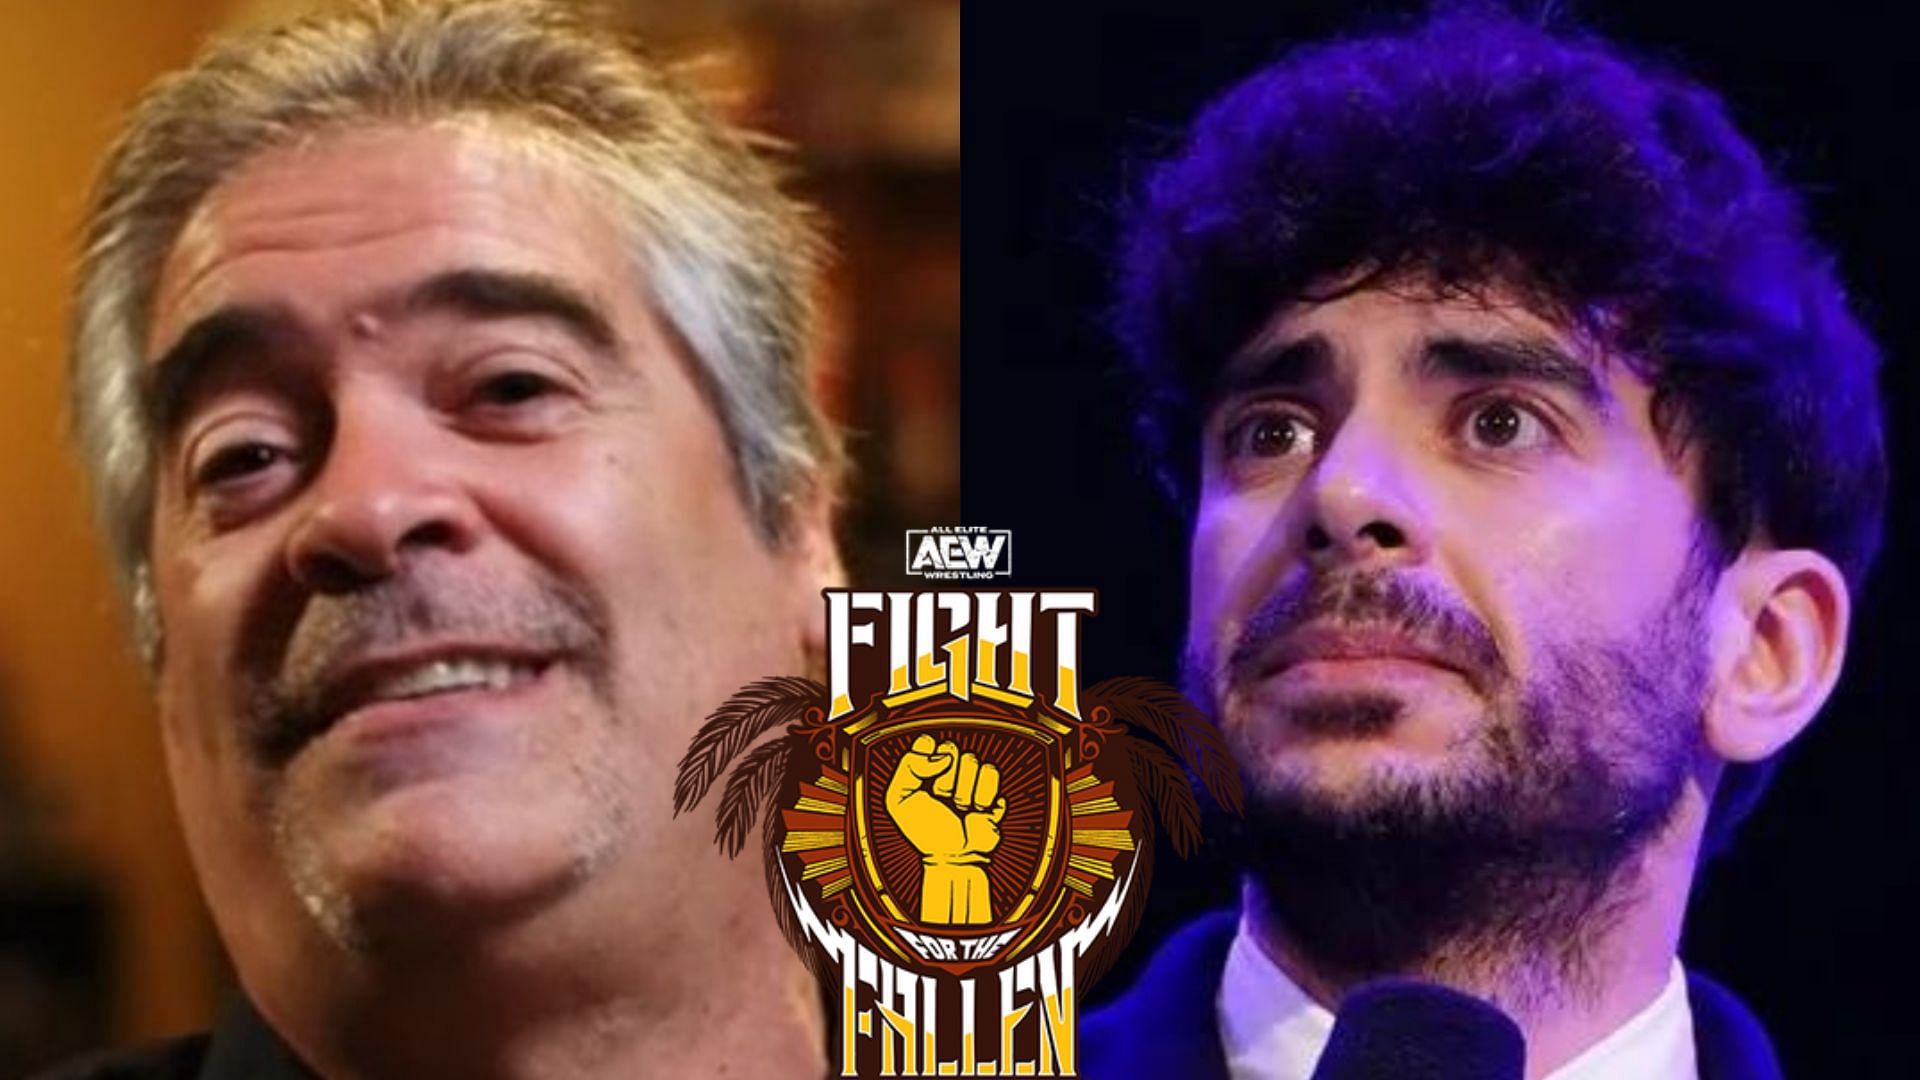 Vince Russo has had some strong words for Tony Khan